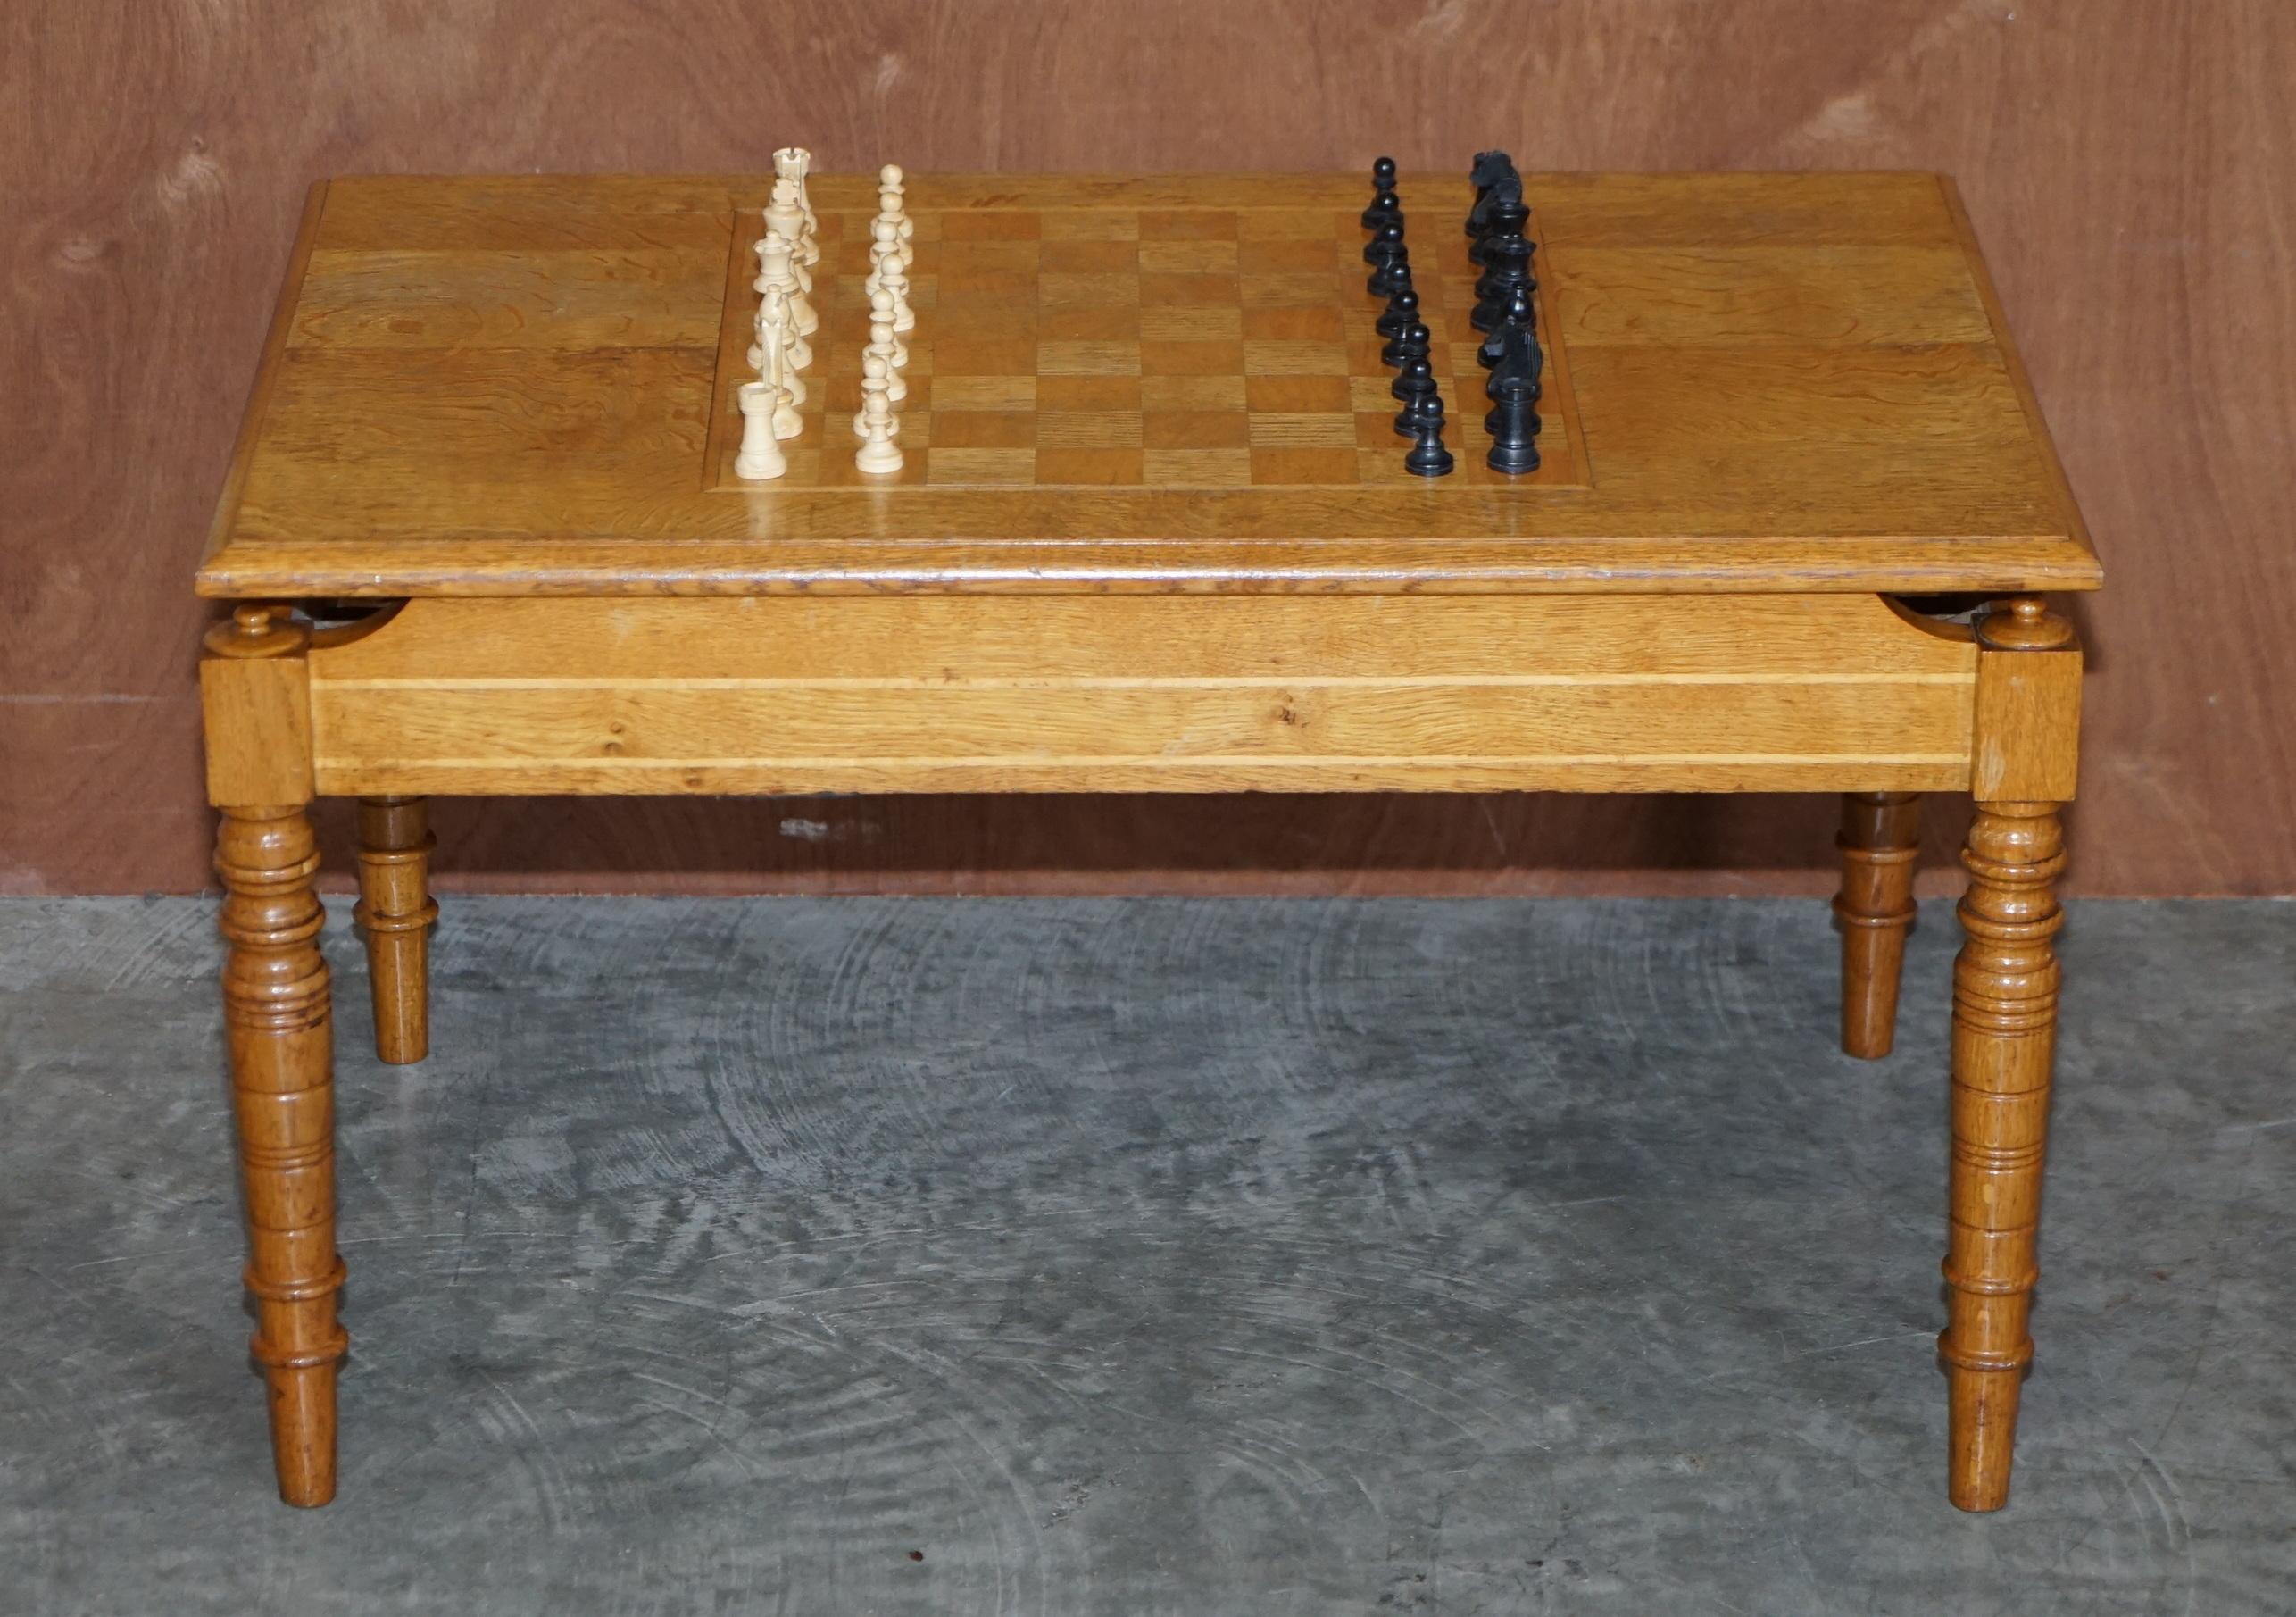 We are delighted to offer for sale this lovely English honey oak vintage chess coffee table with period ebonised chess set

A good looking and well made piece, it can be used as a normal coffee table of course, it has a thick cut oak top and